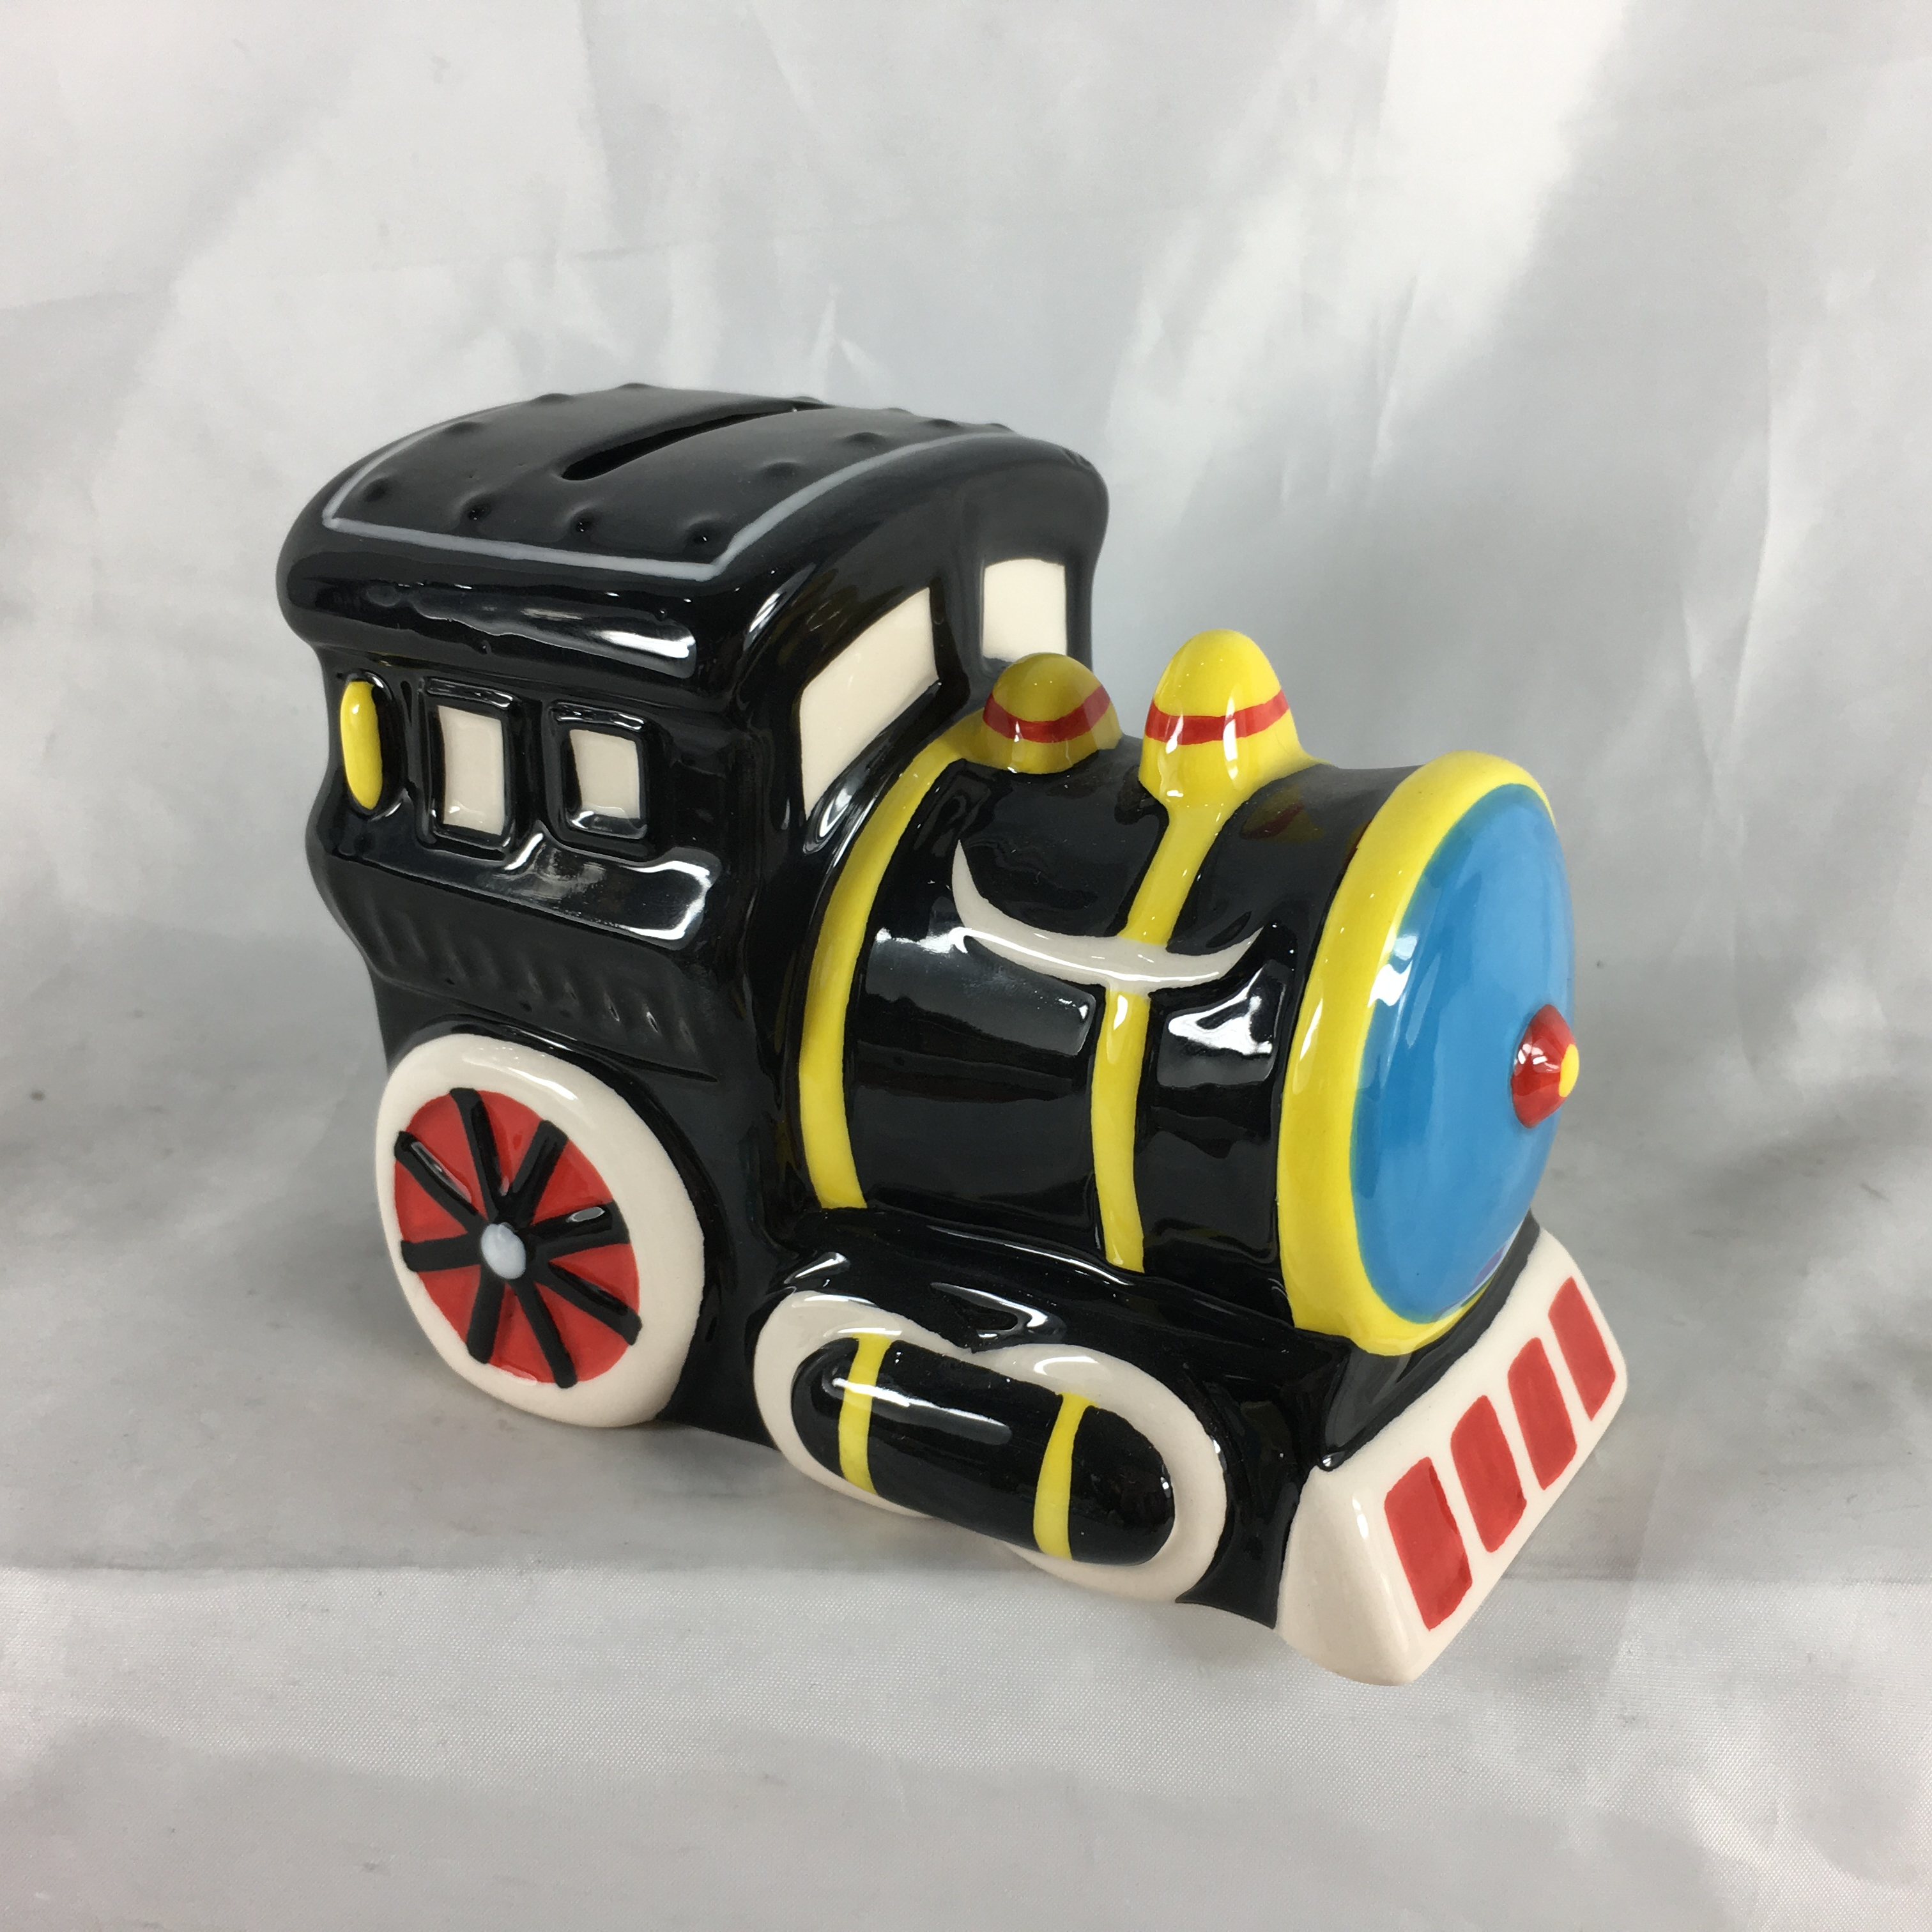 2019 All kinds vehicles shape ceramic coin bank cute motorbike and train design money bank